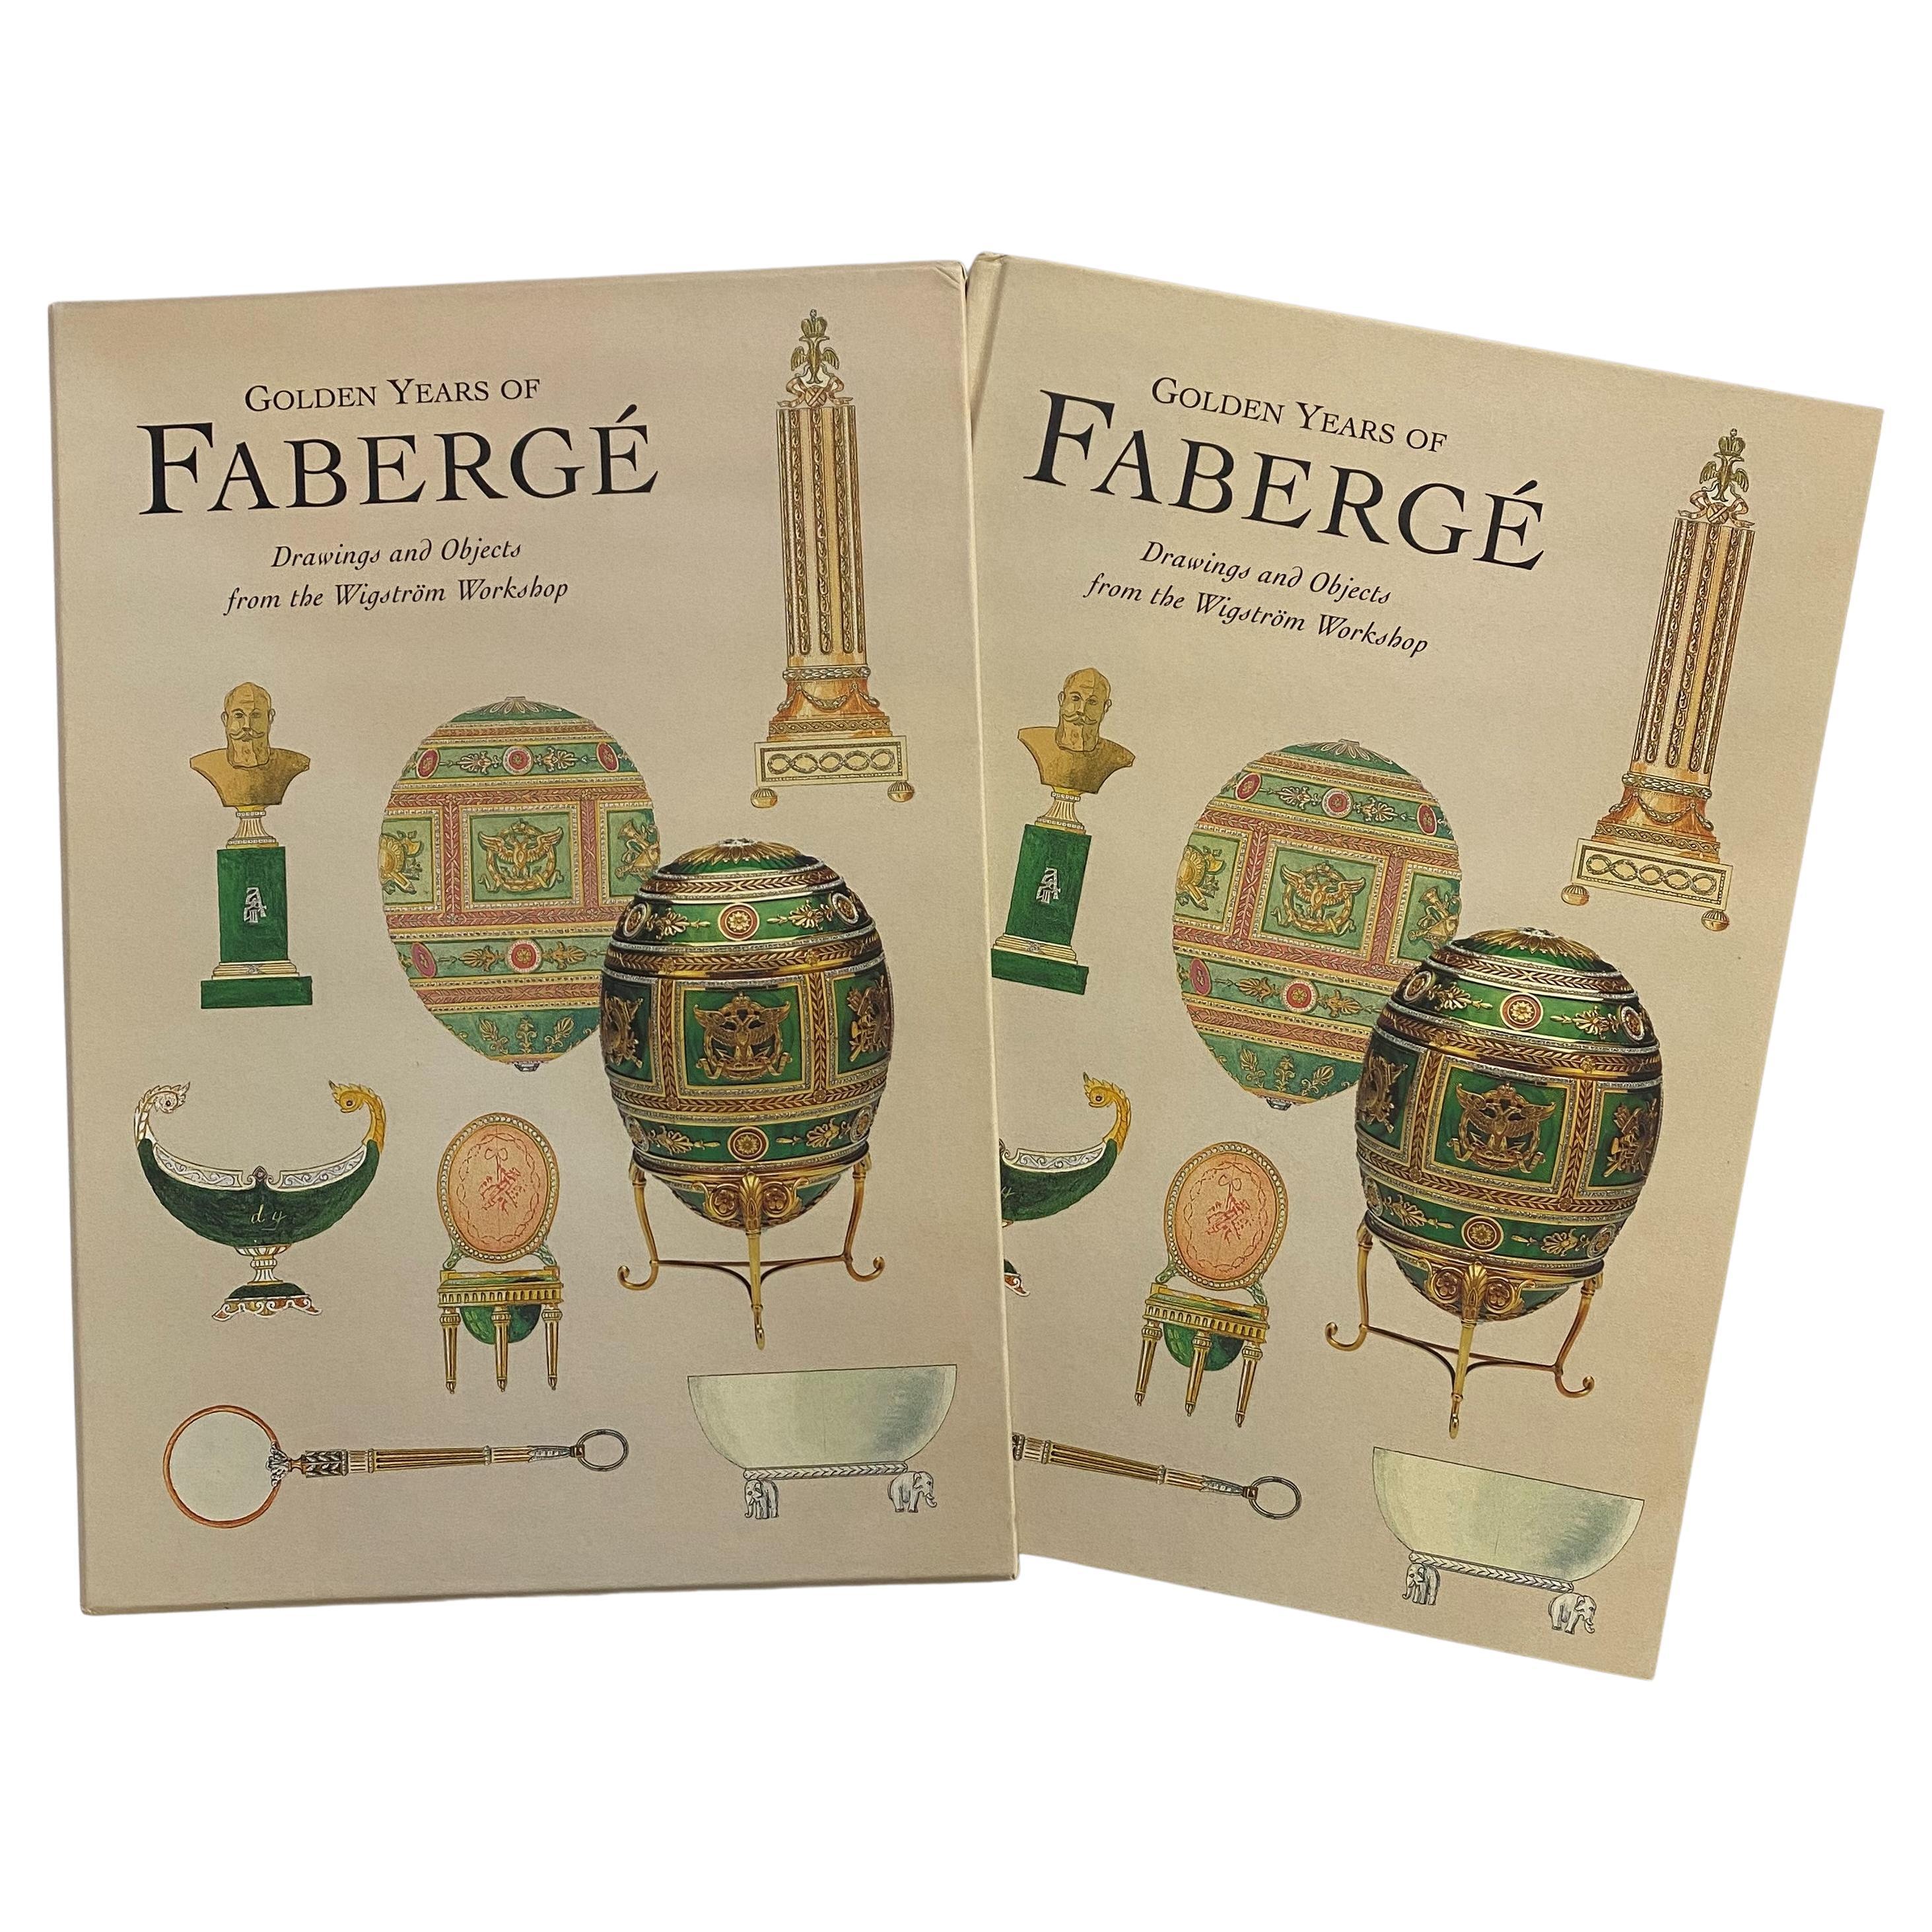 Golden Years of Faberge: Drawings and Objects from the Wigstrom Workshop (Book) For Sale